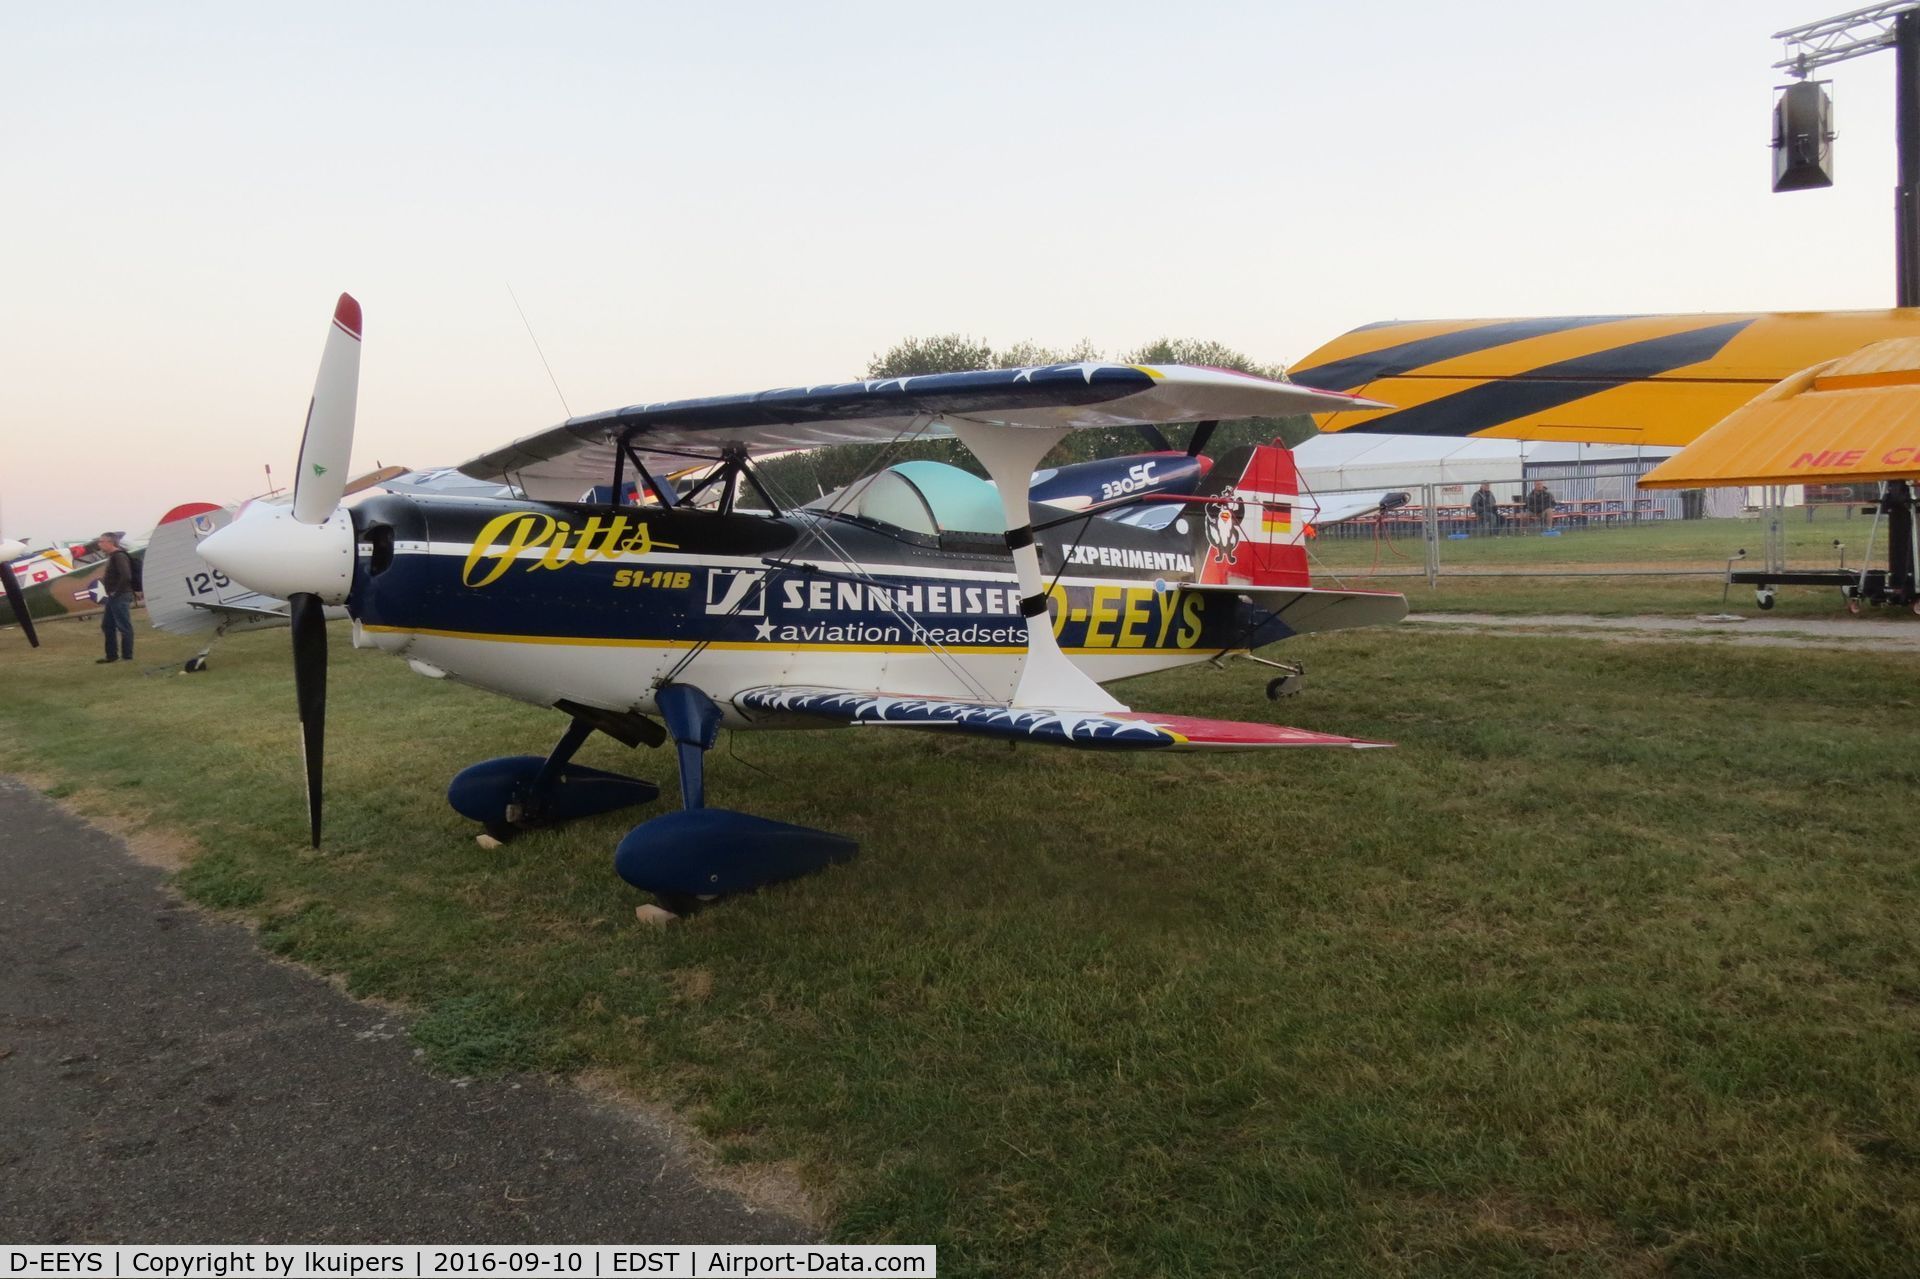 D-EEYS, 2005 Pitts S-1-11 Super Stinker C/N 479, On the Old Timer Fliegertreffen 2016 at Hahnweide early in the morning